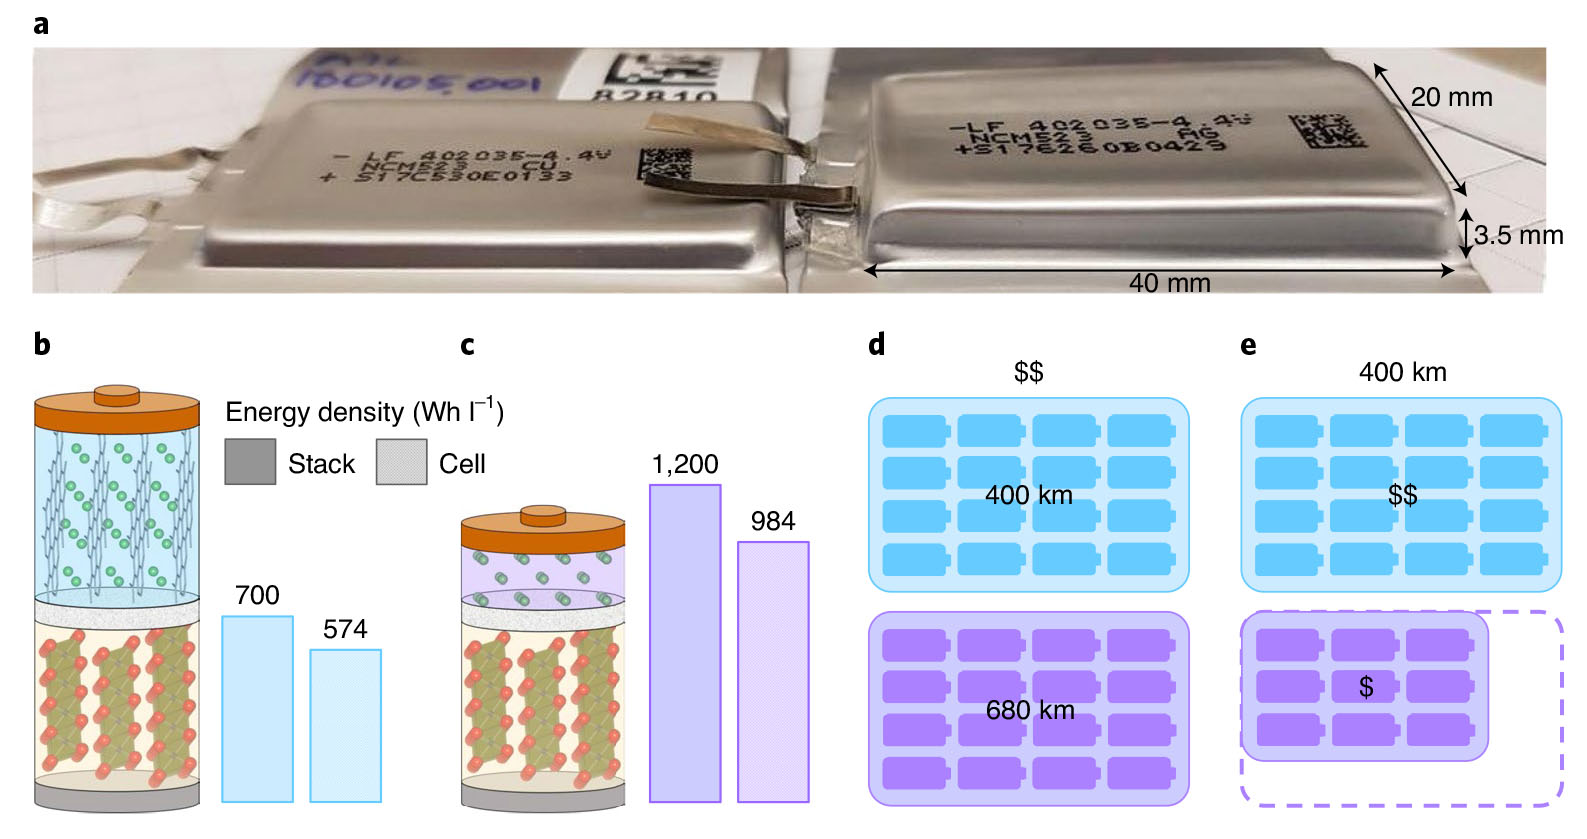 New chemically stable cathode material can make Li-ion batteries